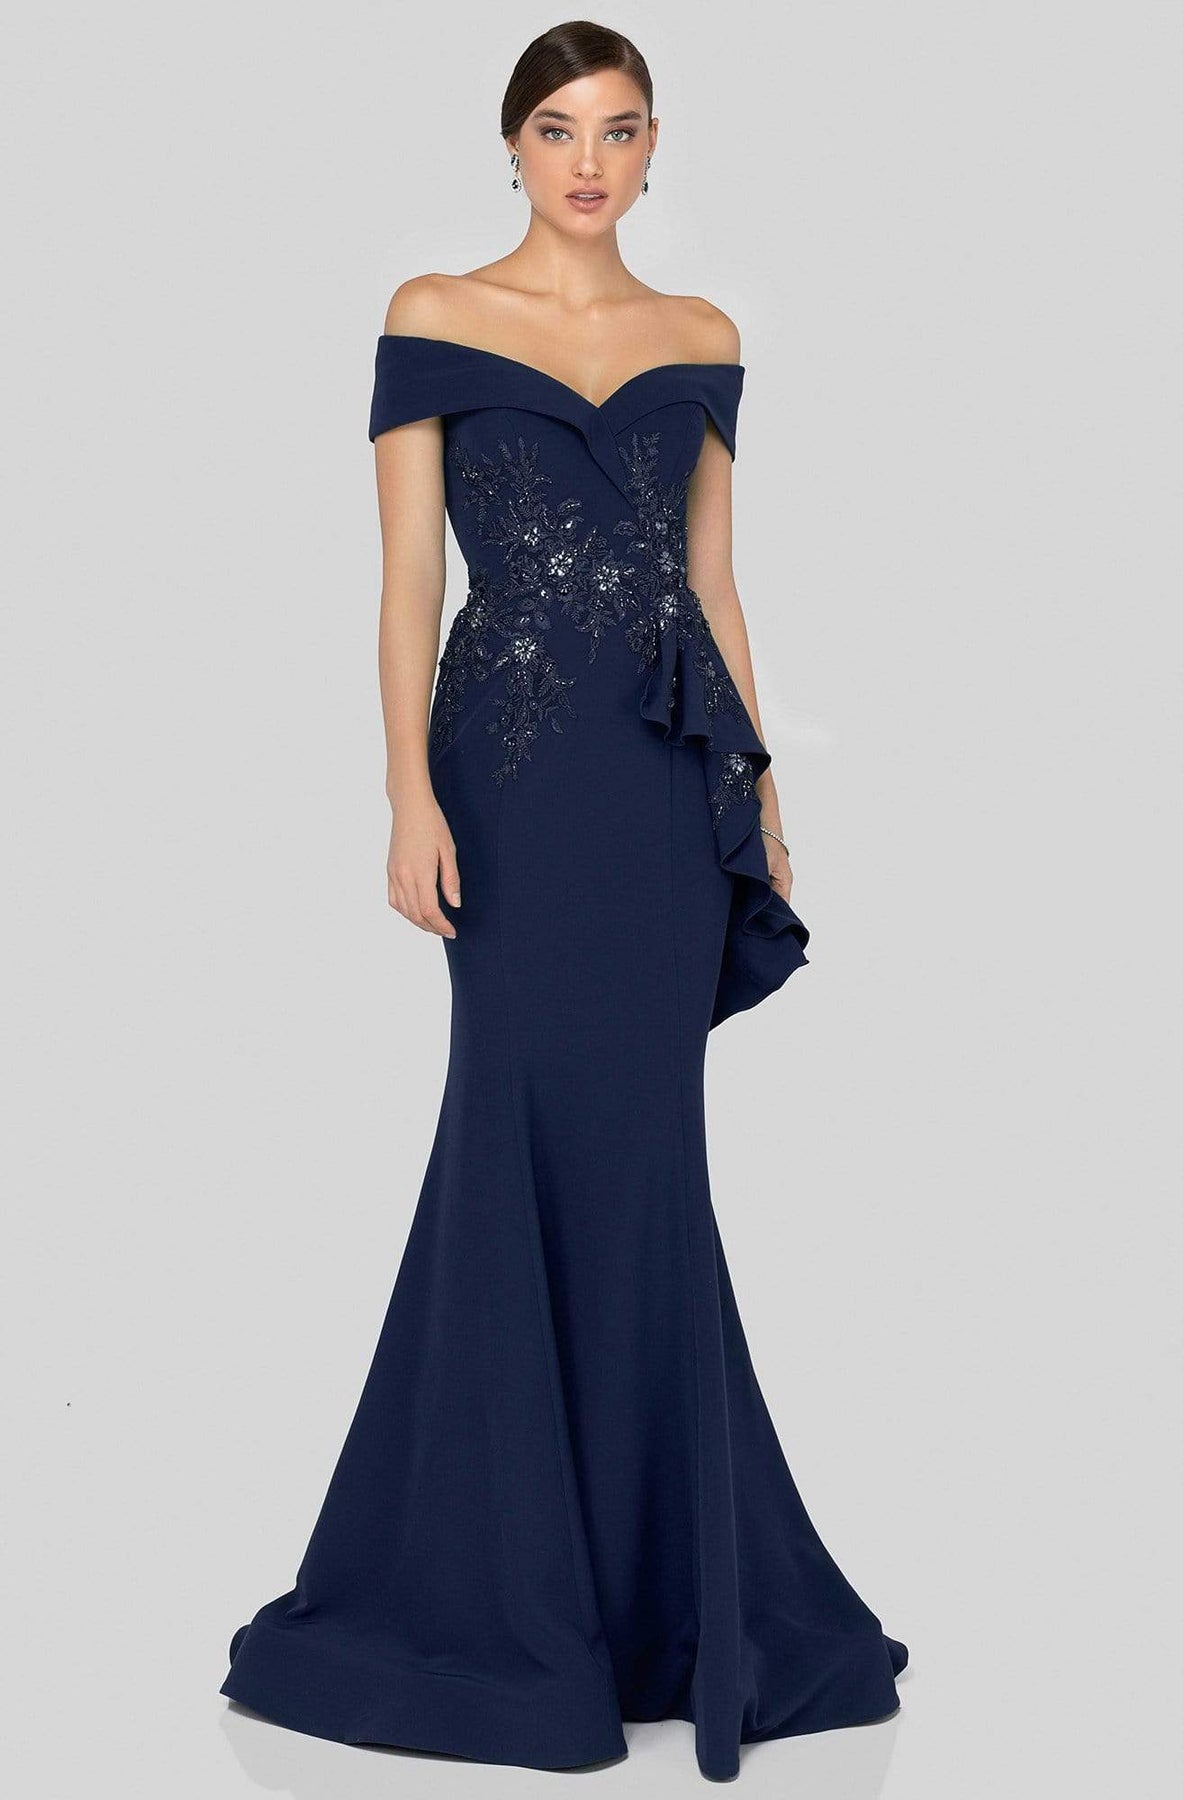 Terani Couture - 1911M9339 Off Shoulder Side Drape Peplum Mermaid Gown Special Occasion Dress 0 / Navy